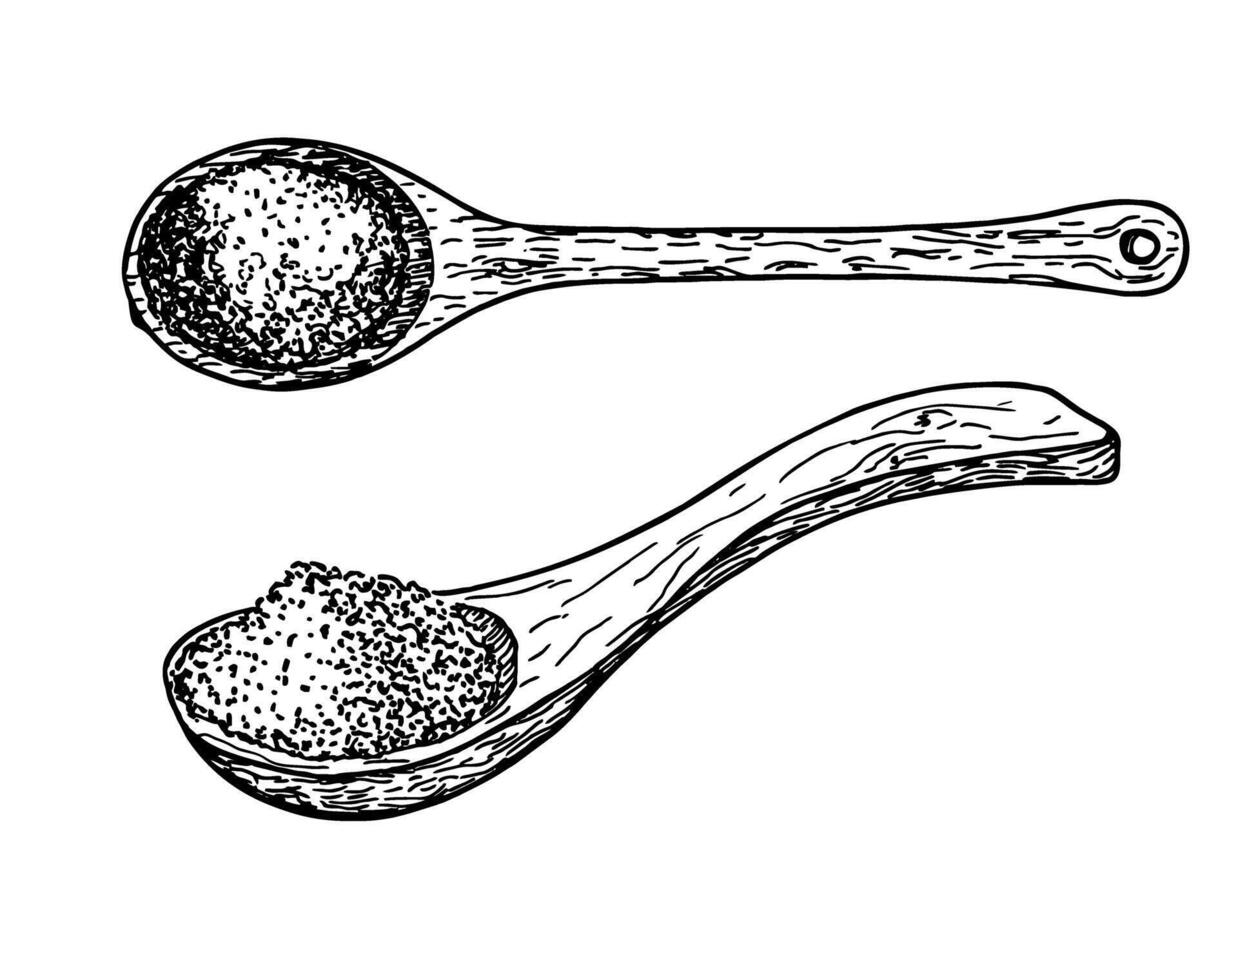 Wooden spoon with spices, salt, sugar, flour, cereals set. Large wooden spoon, vintage. Culinary vector sketch illustration. For recipes, cookbooks, illustrations hand drawing isolated on white.